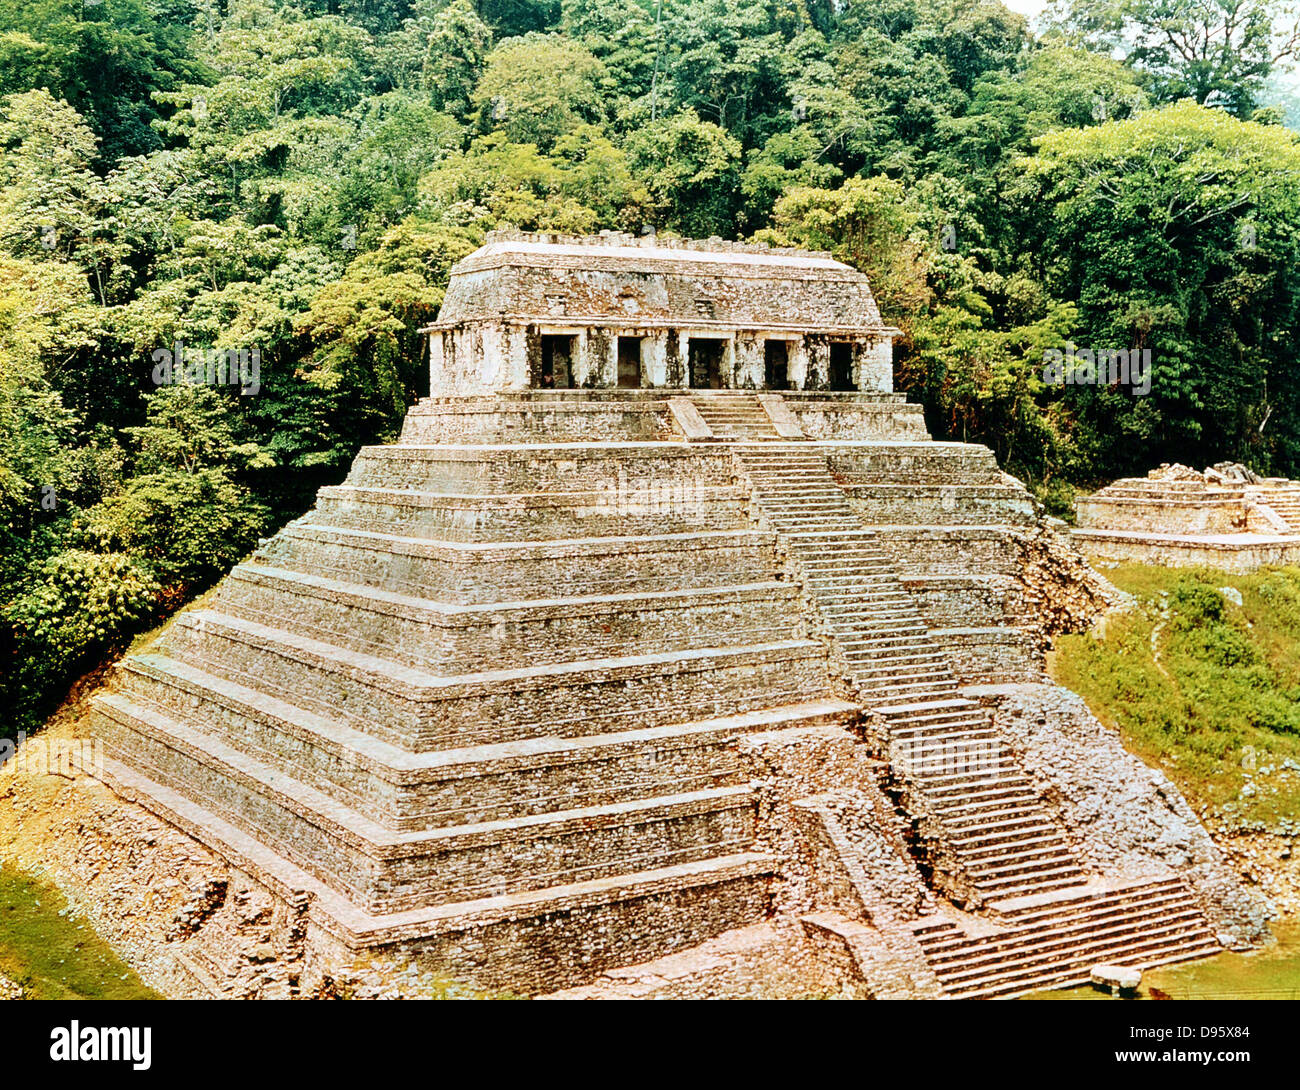 Pyramids and Temple-of-the-Inscriptions, Palenque, Mexico. Classical Mayan architecture Stock Photo